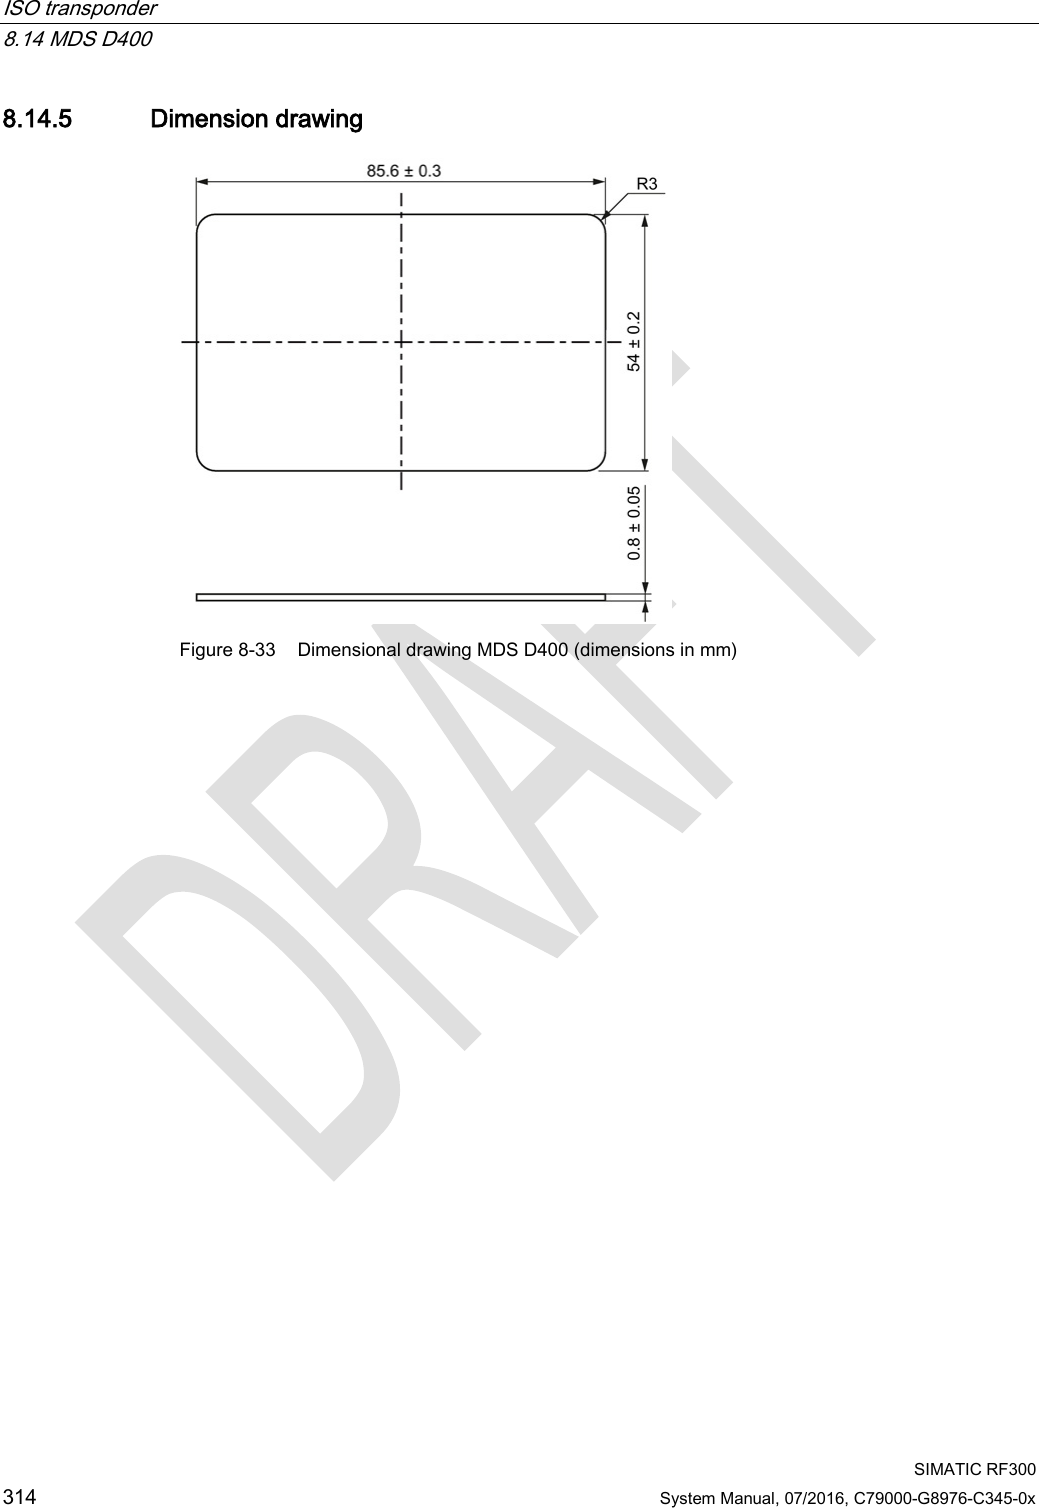 ISO transponder   8.14 MDS D400  SIMATIC RF300 314 System Manual, 07/2016, C79000-G8976-C345-0x 8.14.5 Dimension drawing  Figure 8-33 Dimensional drawing MDS D400 (dimensions in mm)  